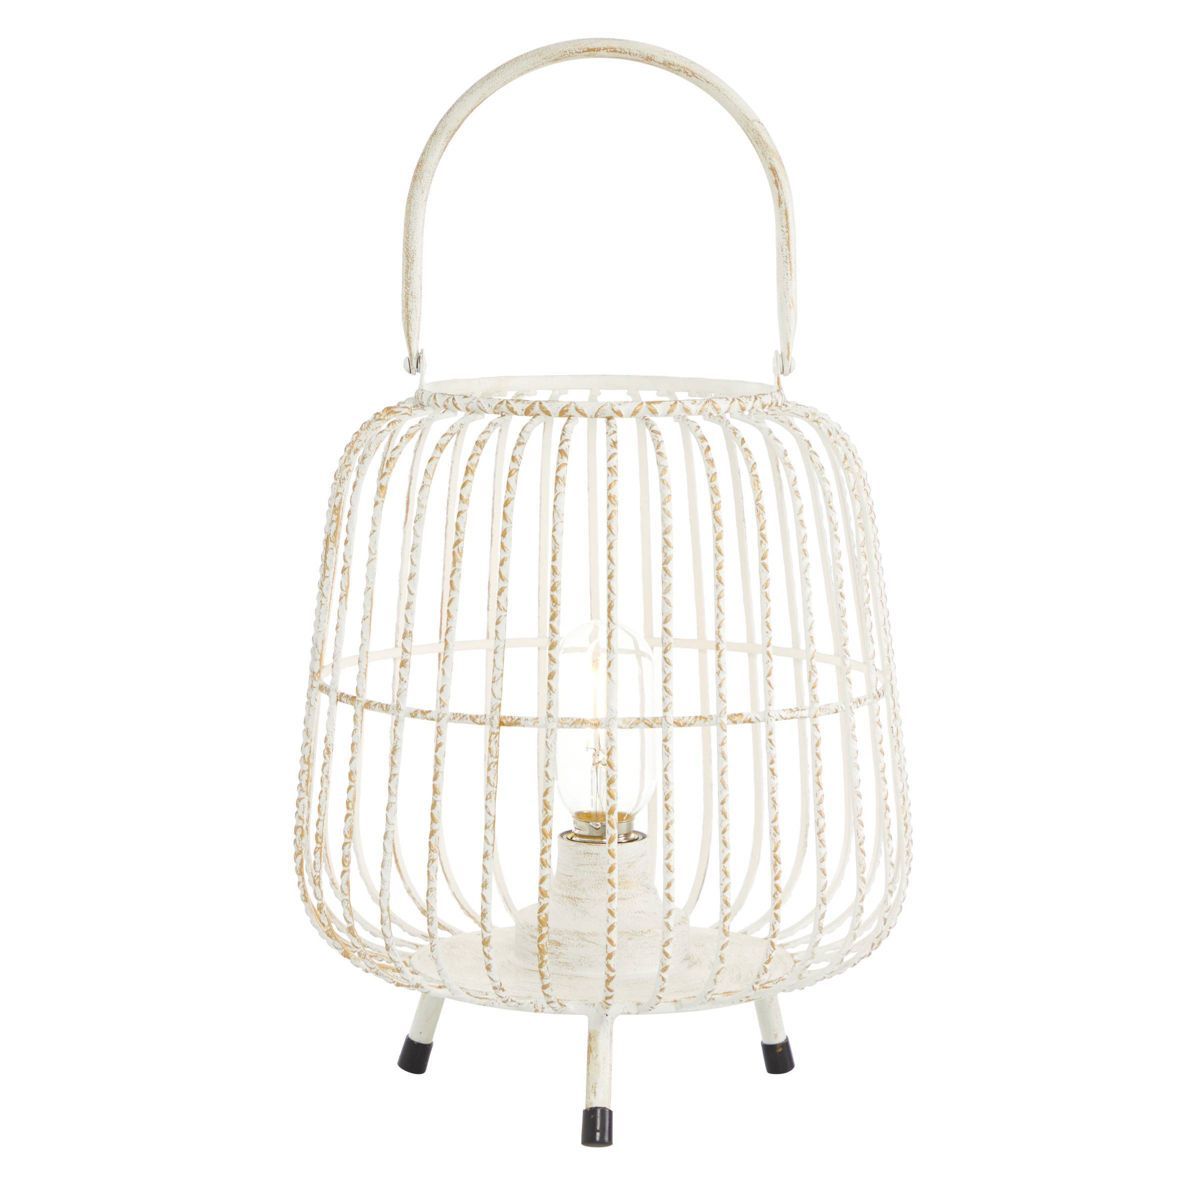 12" x 10" Modern Metal Caged Candle Holder with Led Light Bulb Center White - Olivia & May | Target